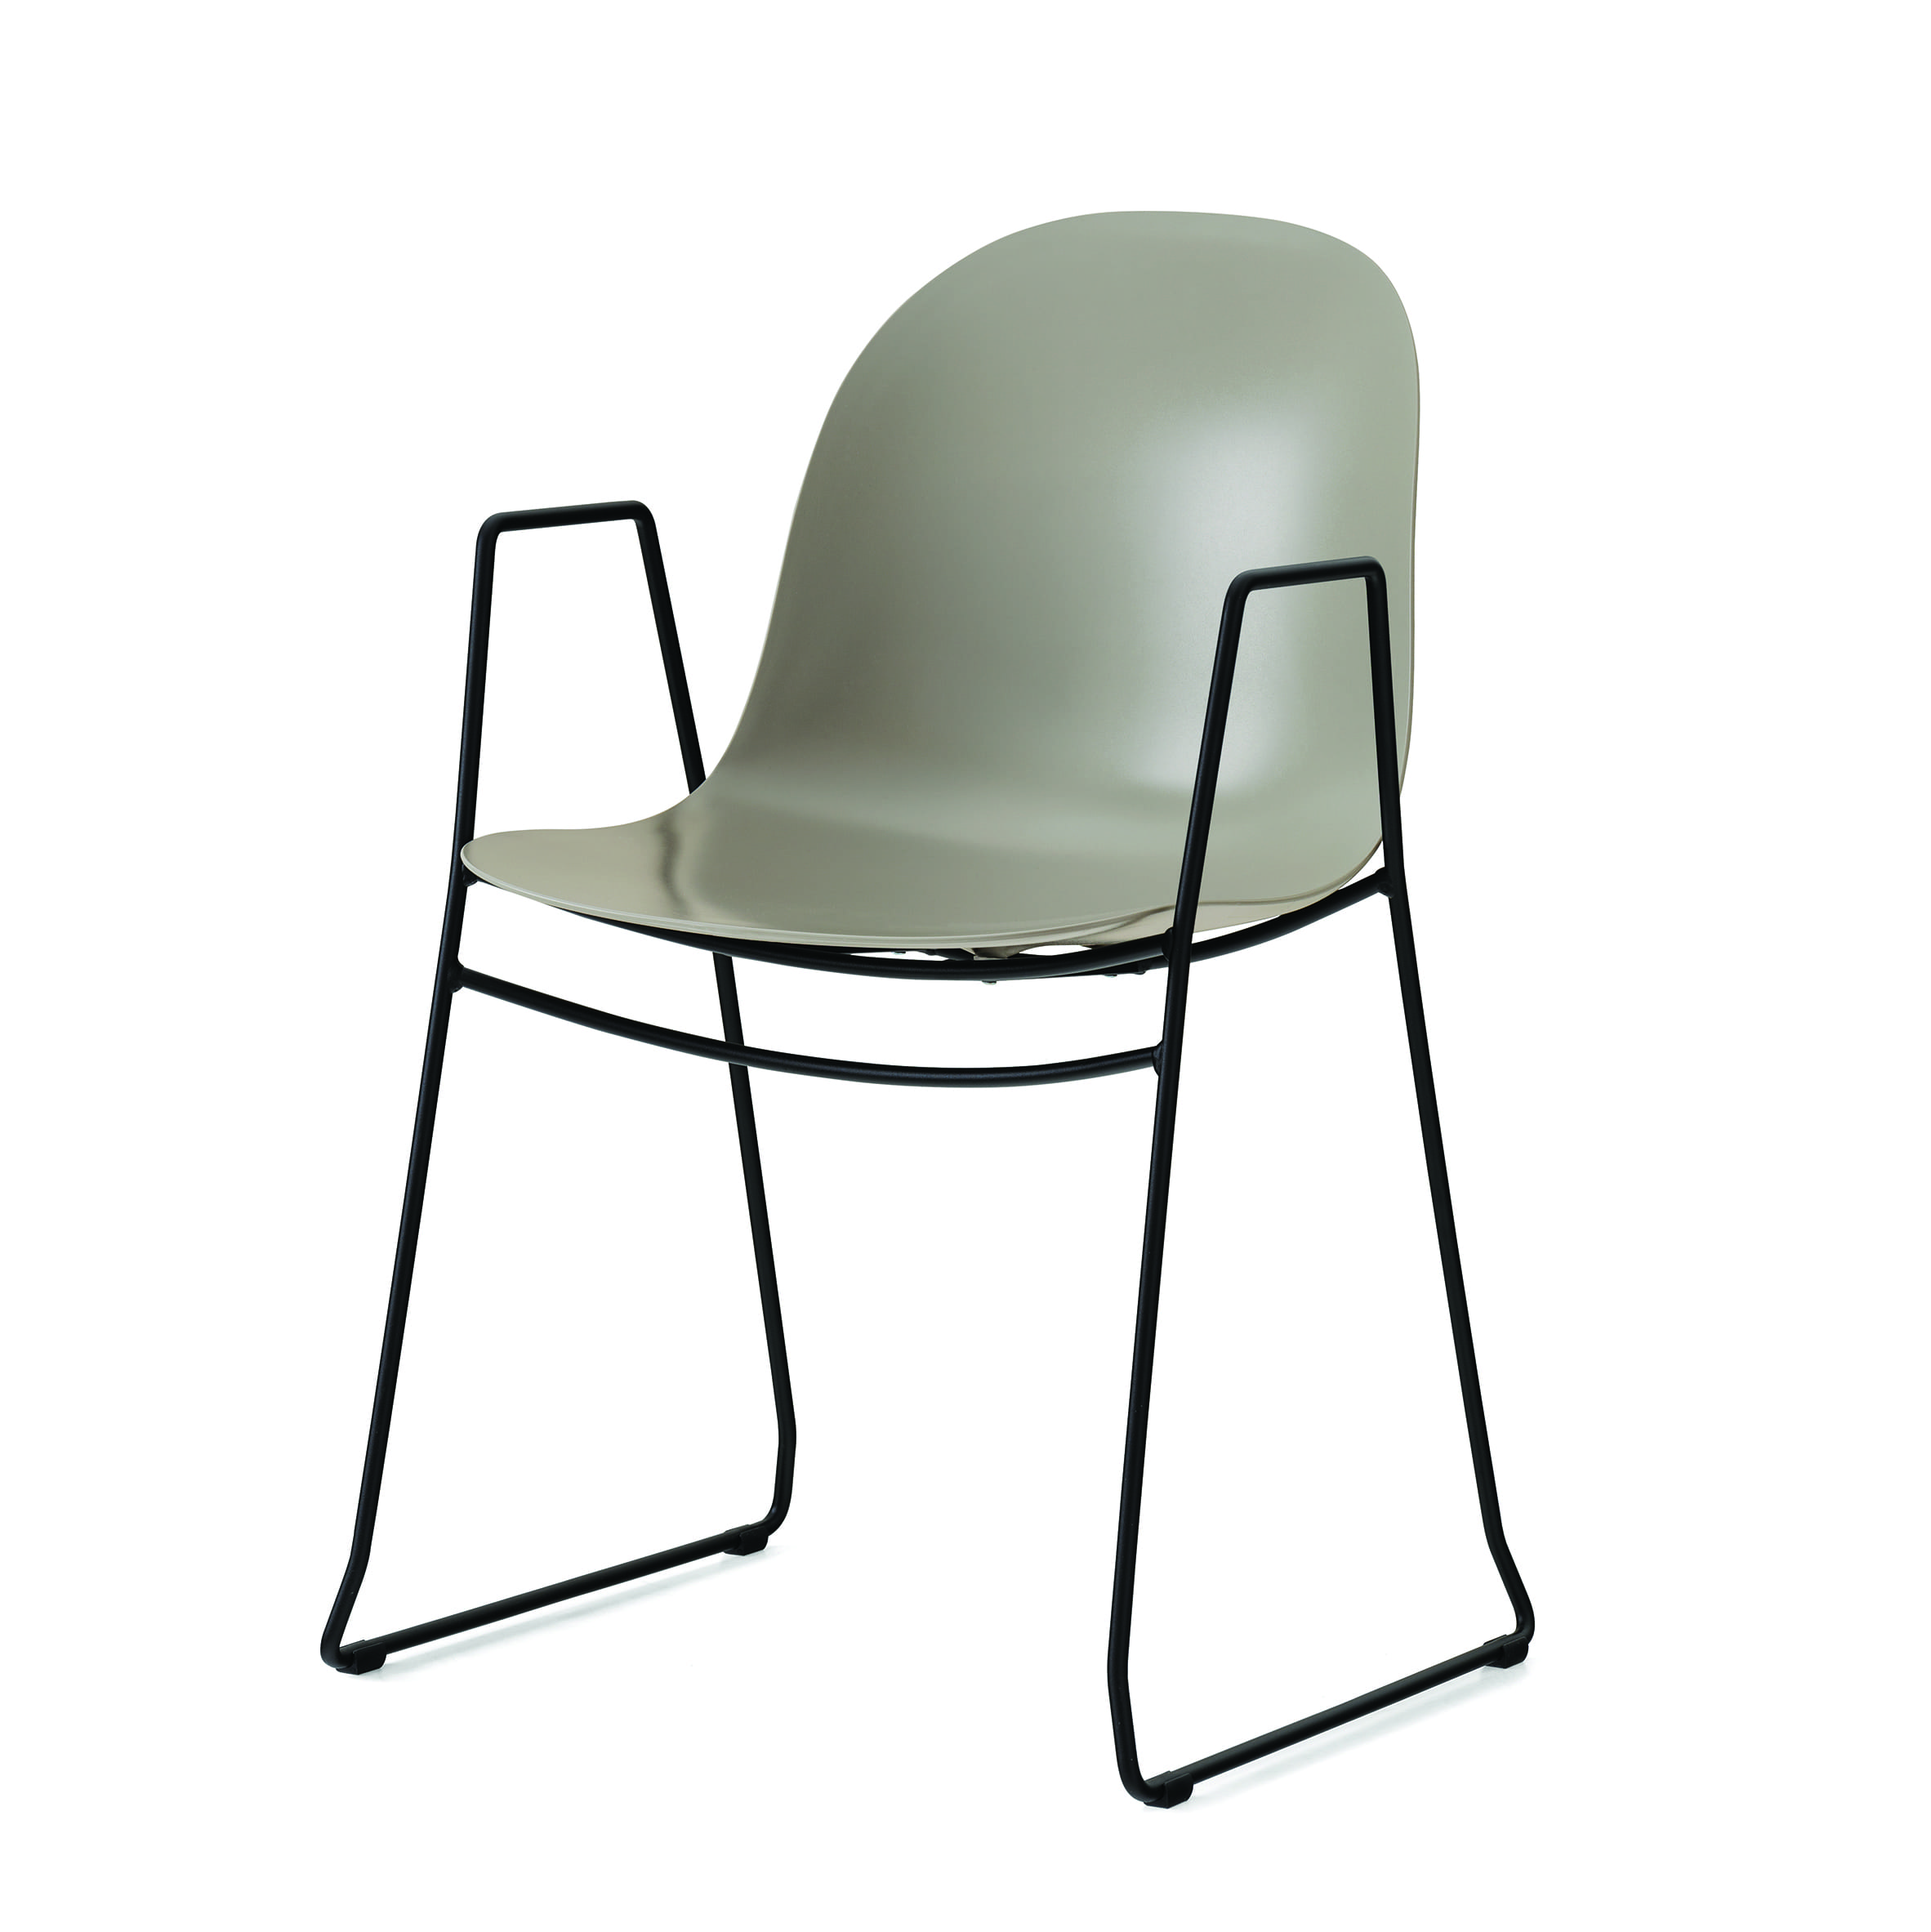 CB1697 Academy Chair Connubia by